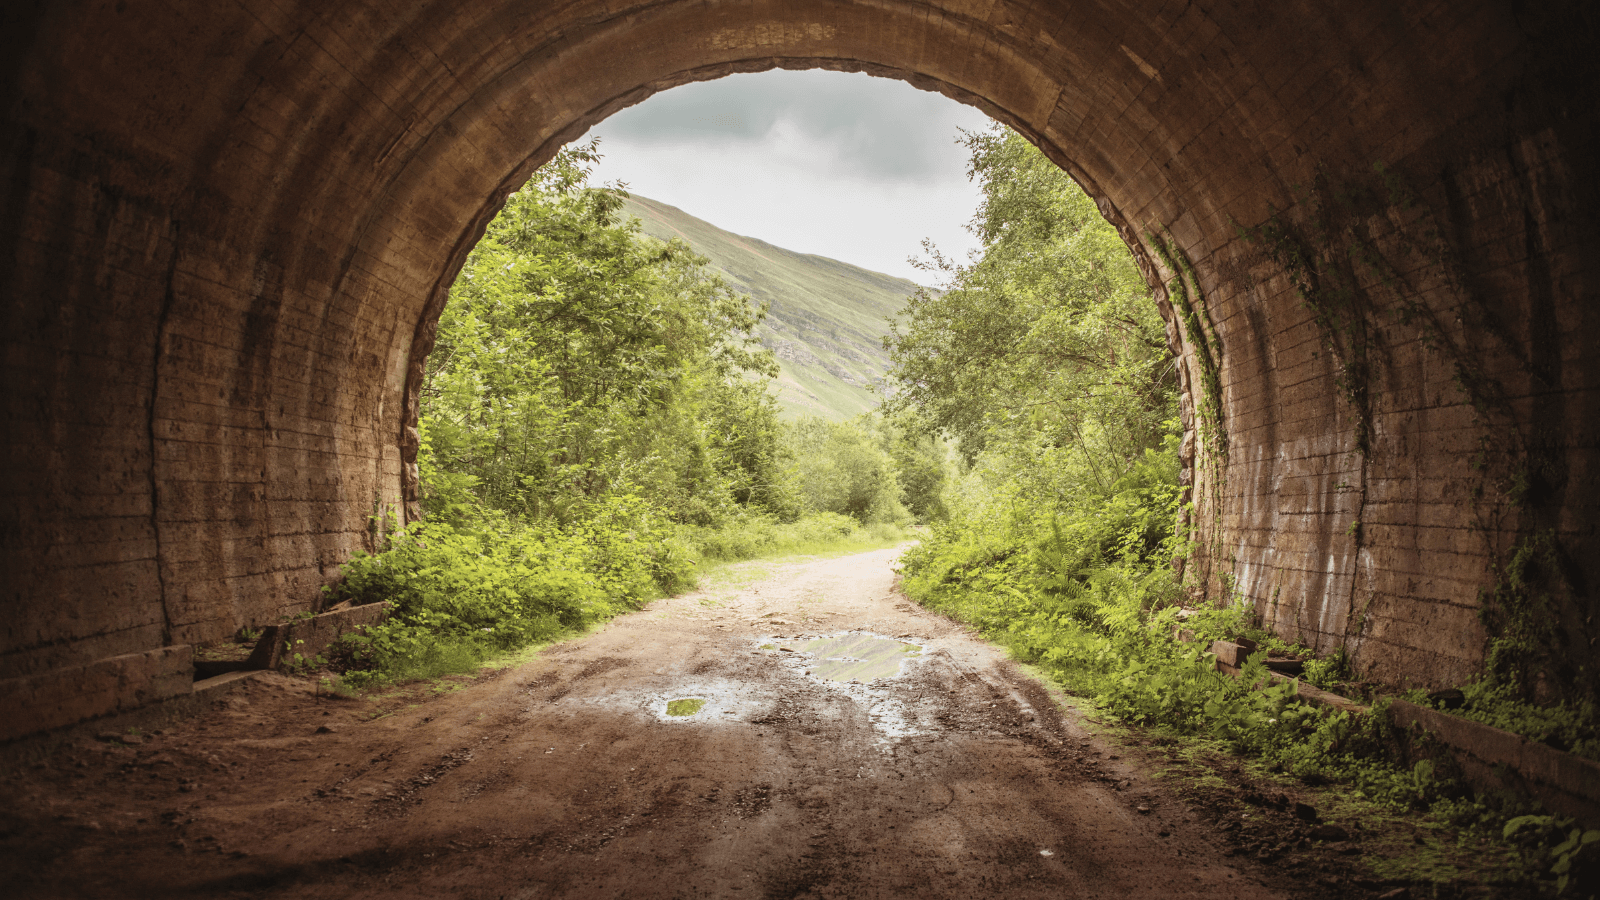 A picture of a tunnel, with the end of the tunnel in sight where you can see a road, sunlight and trees. To signify 'a light at the end of the tunnel'.